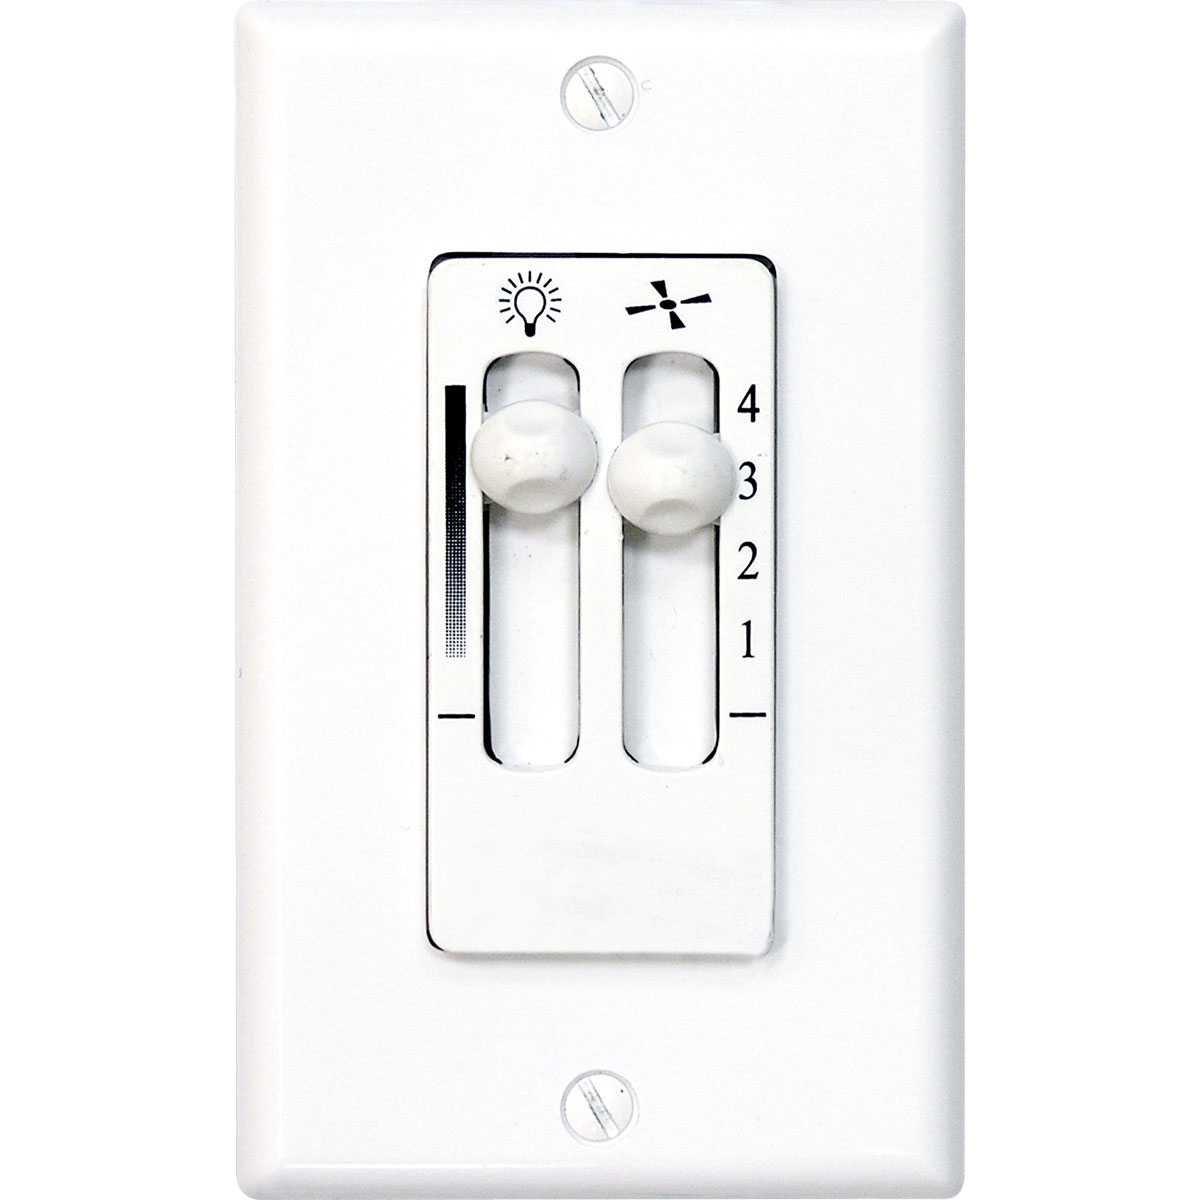 Four-speed, ceiling fan white wall control provides convenient operation for fans with pull-chain controls. Includes full-range lighting dimmer and switch plate cover. Requires two circuits - fits single gang wall box.